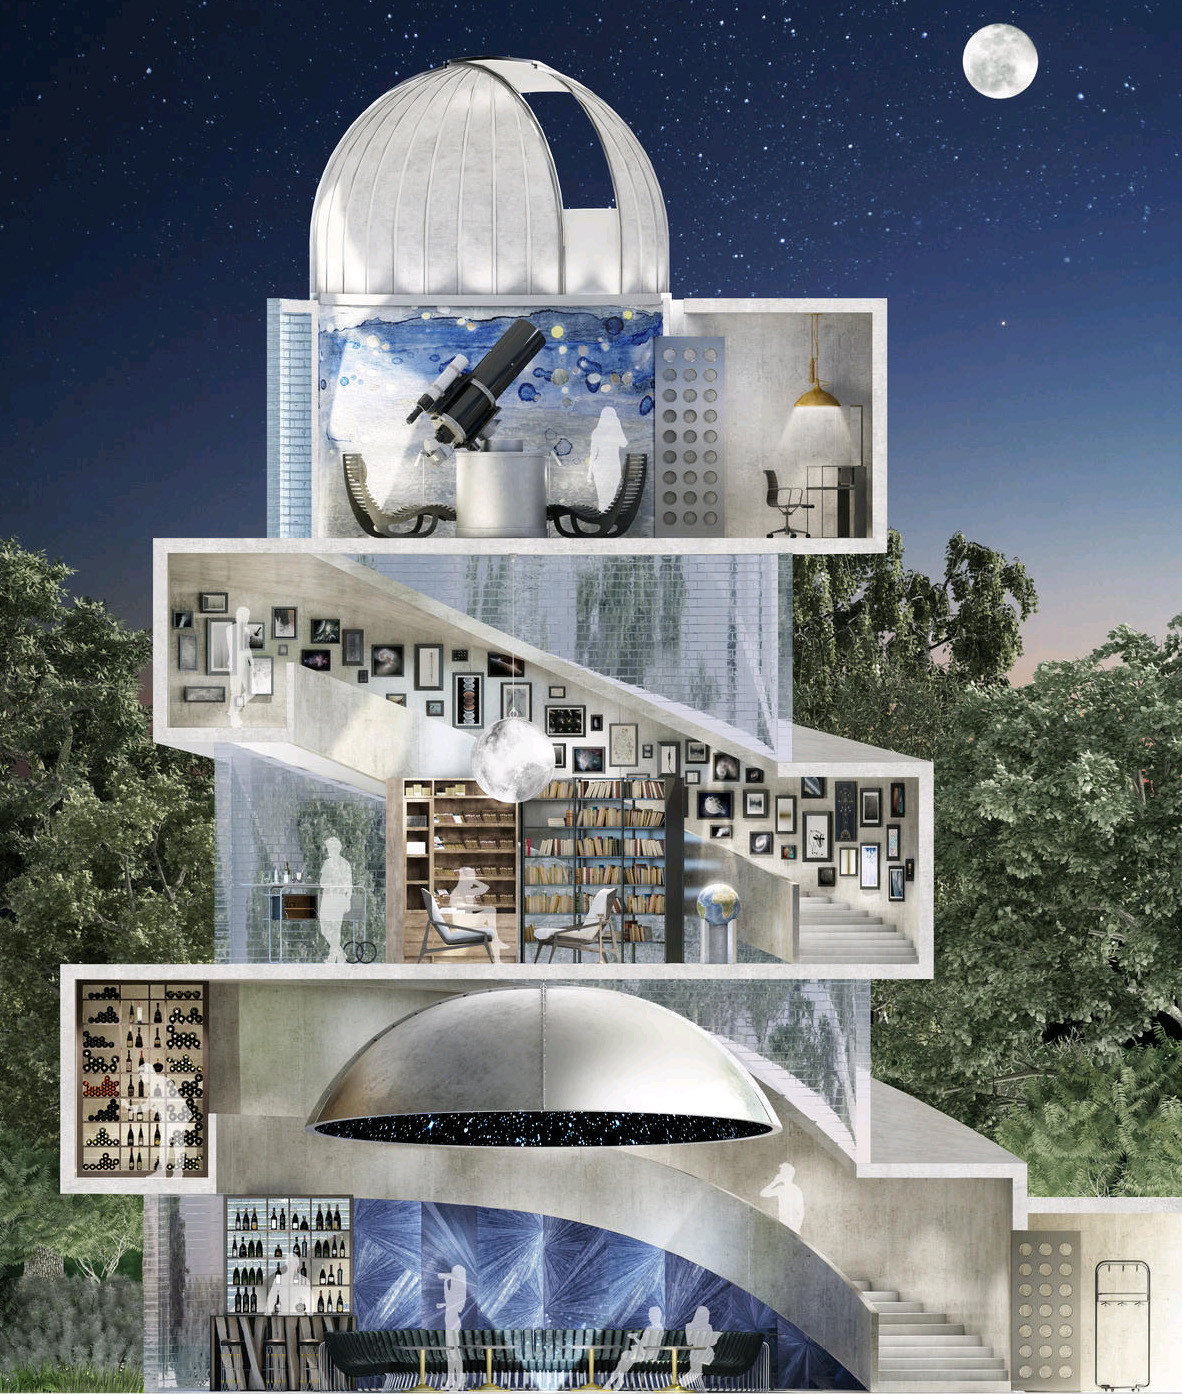 Backyard Observatory Dome
 Build a deluxe home observatory for HK$170 million